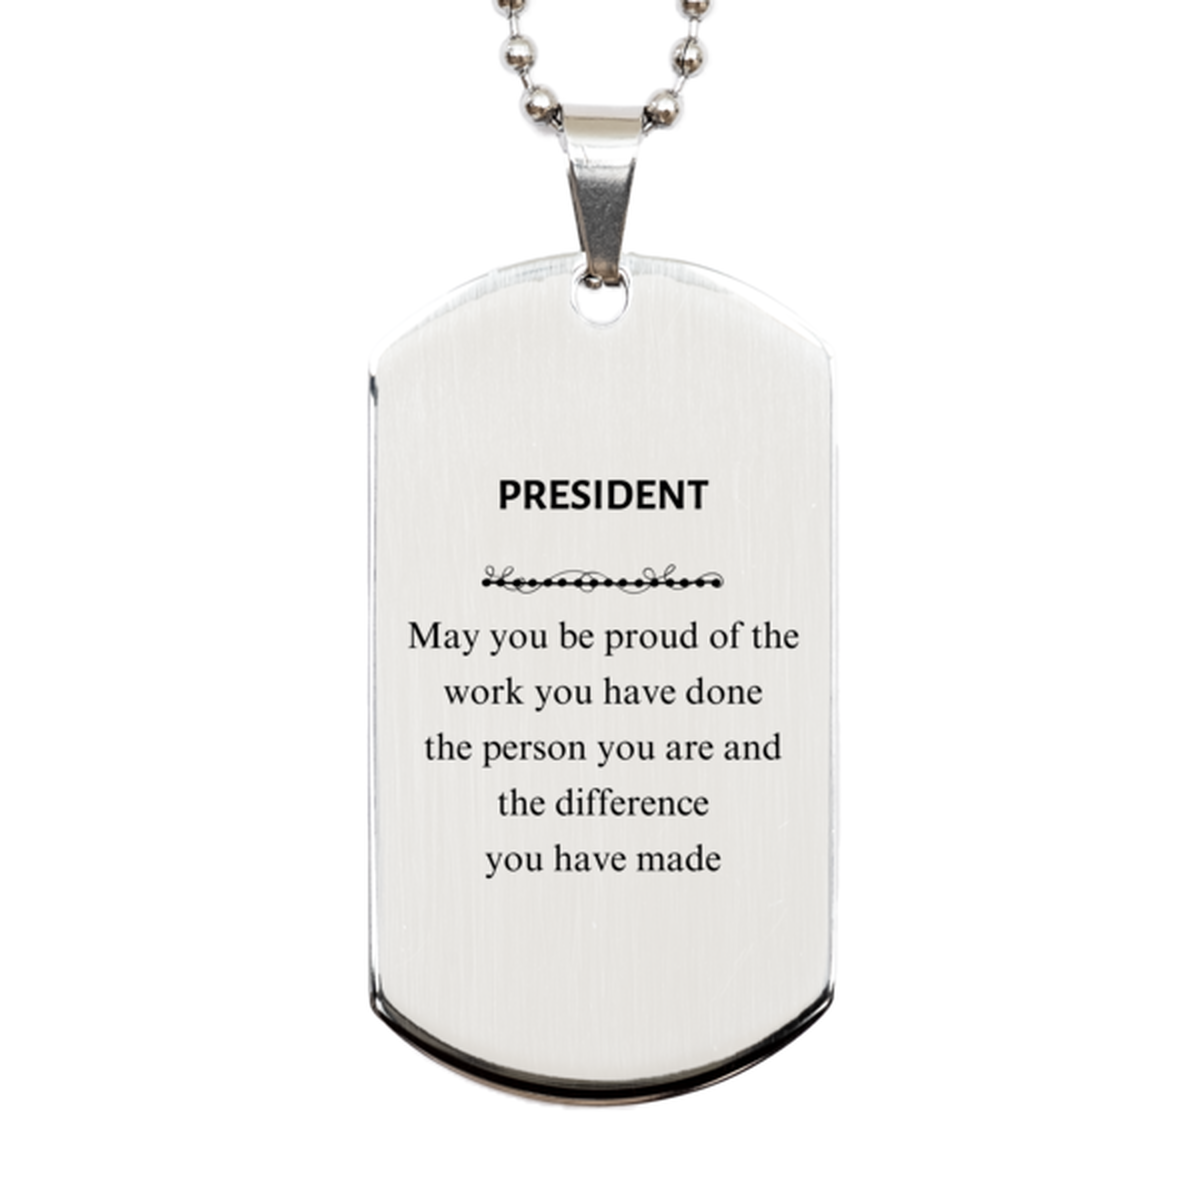 President May you be proud of the work you have done, Retirement President Silver Dog Tag for Colleague Appreciation Gifts Amazing for President